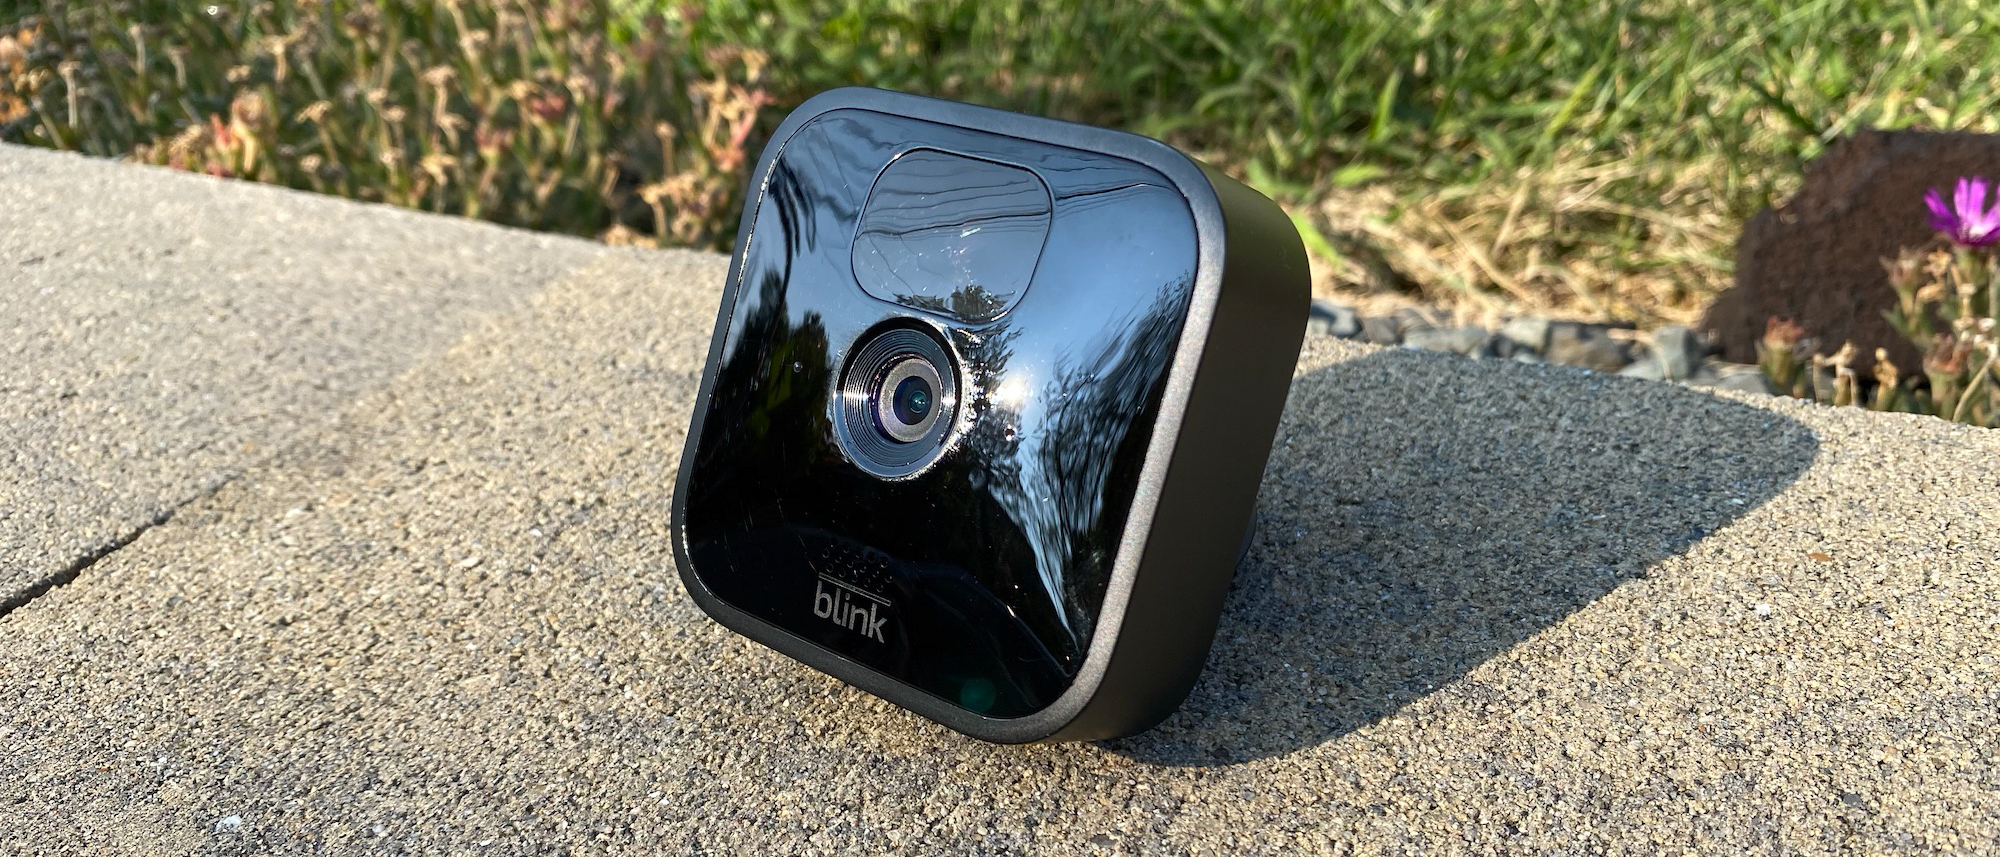 s new Blink cameras can run for up to four years